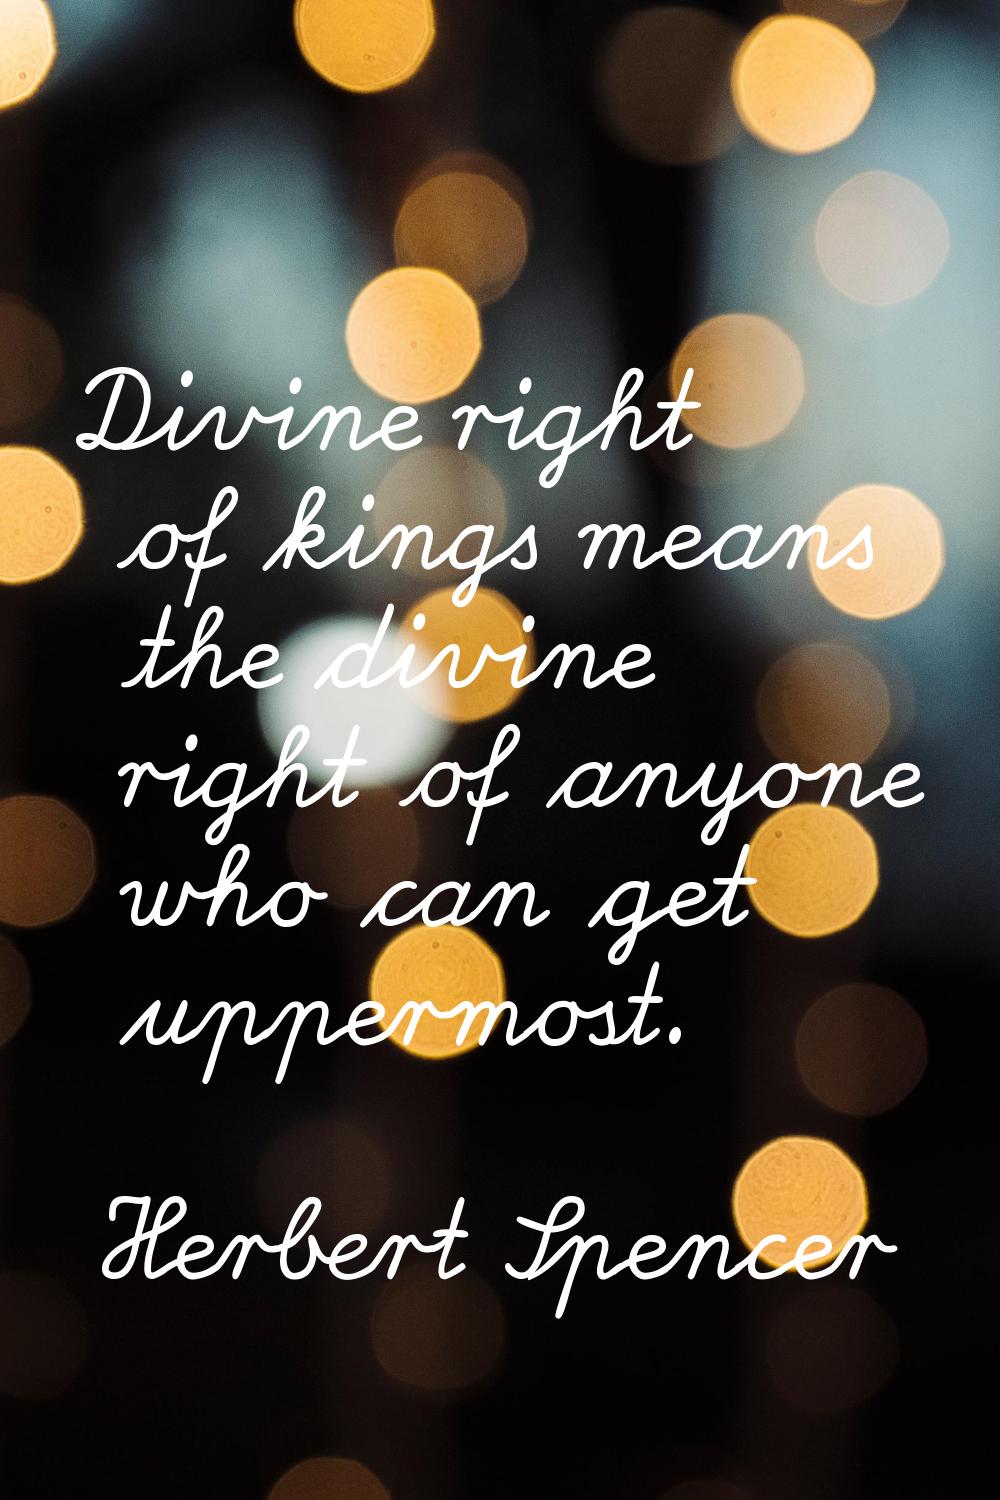 Divine right of kings means the divine right of anyone who can get uppermost.